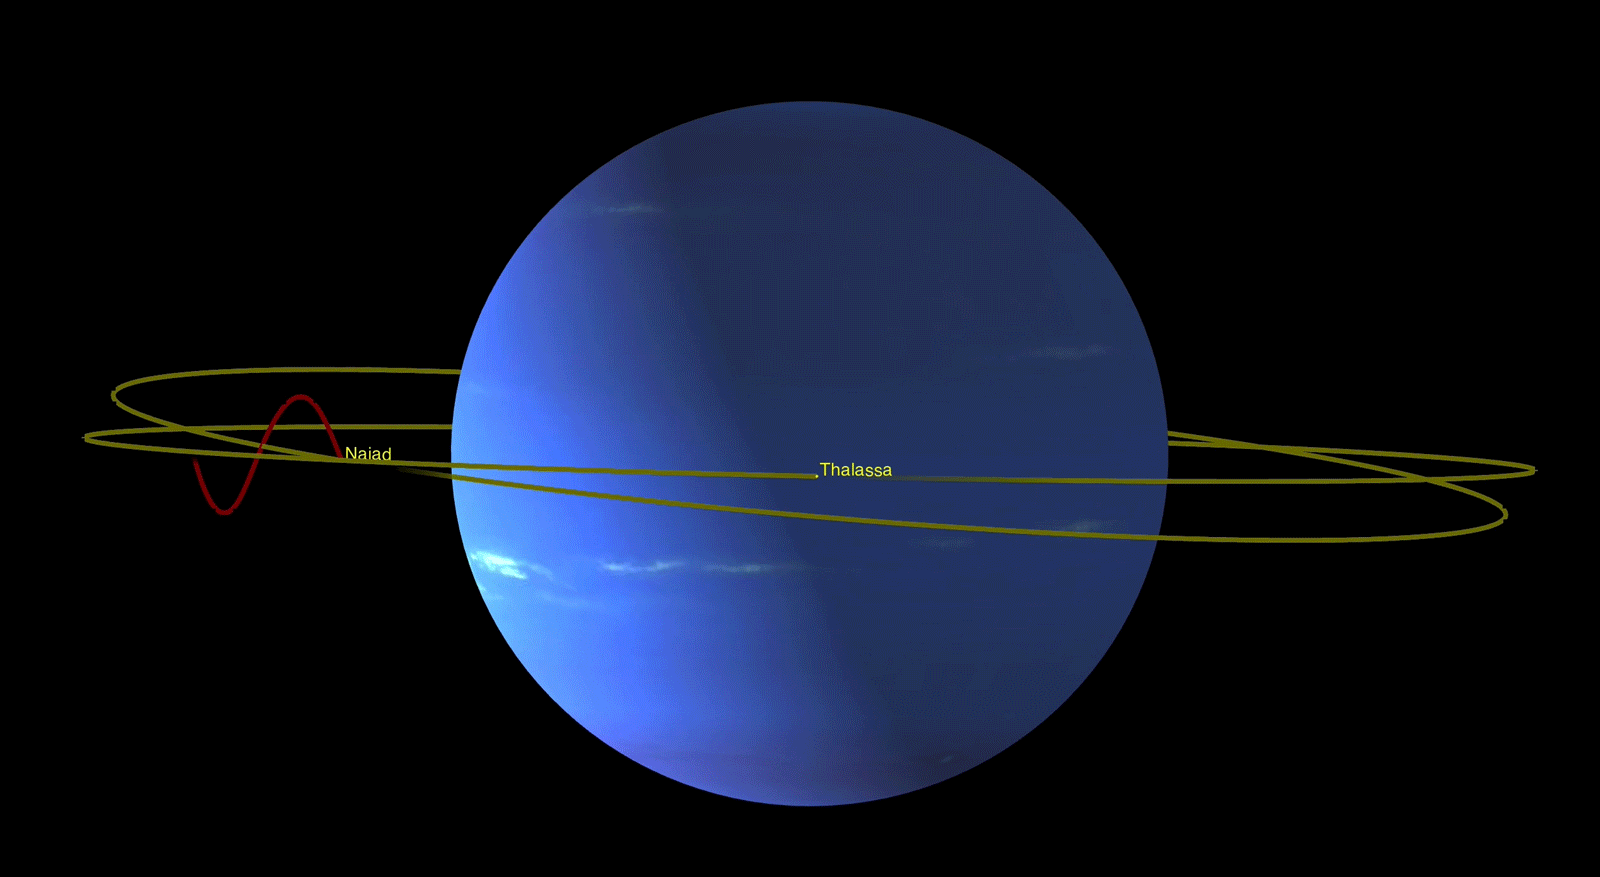 An animation shows how Naiad and Thalassa dodge one another on their nearly-overlapping orbits. The point of view in this animation follows Thalassa, so it always appears to be in the center of the image, but both moons wobble relative to one another.